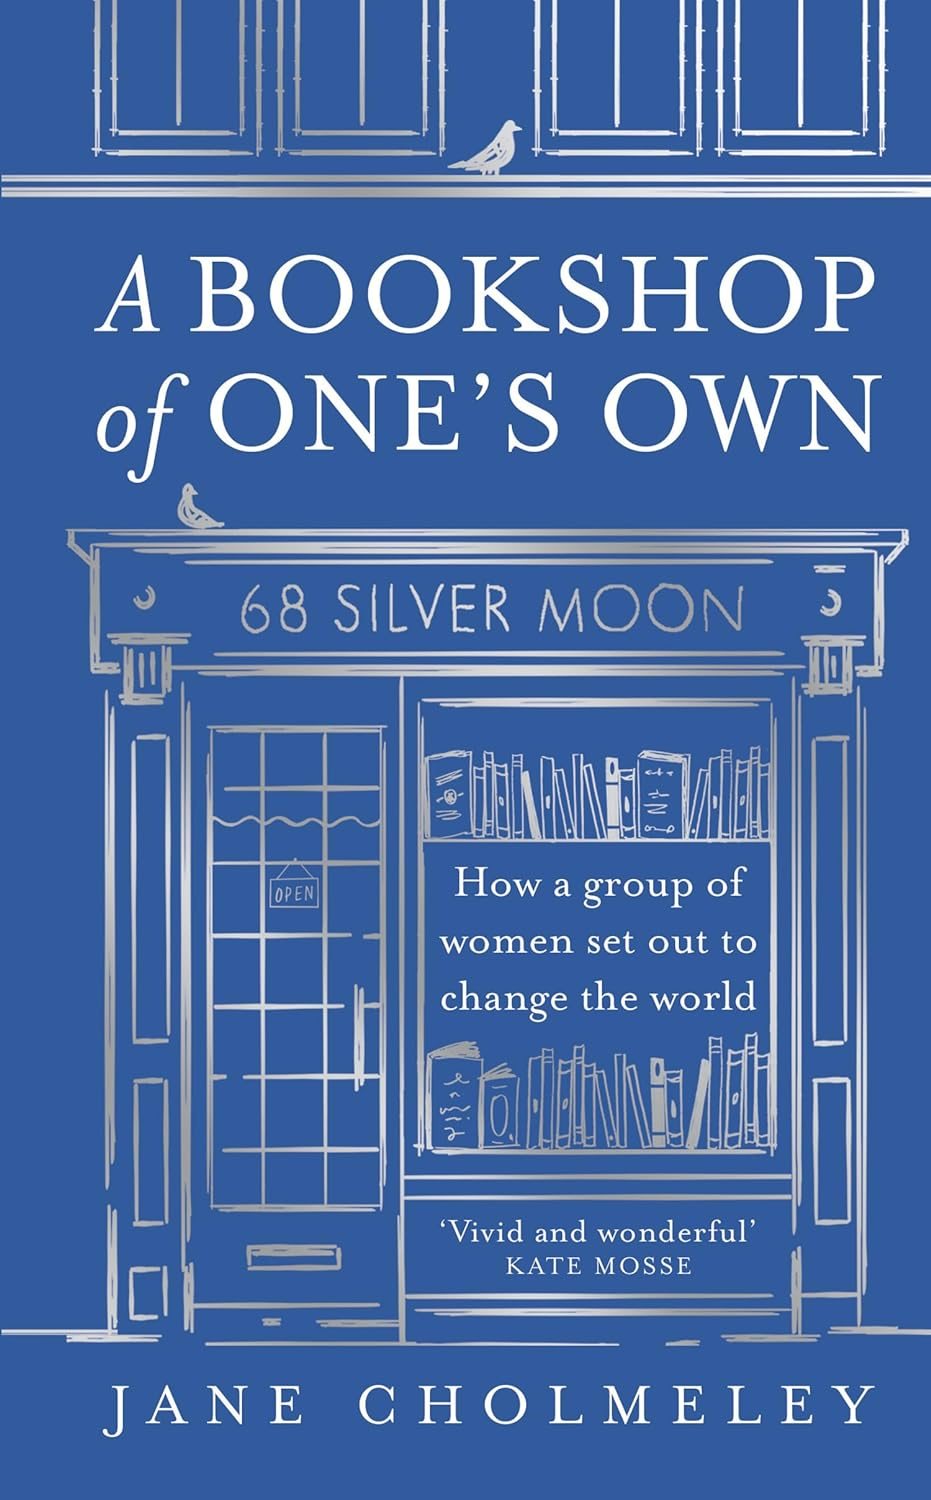 A Bookshop of One's Own | Prize Draw